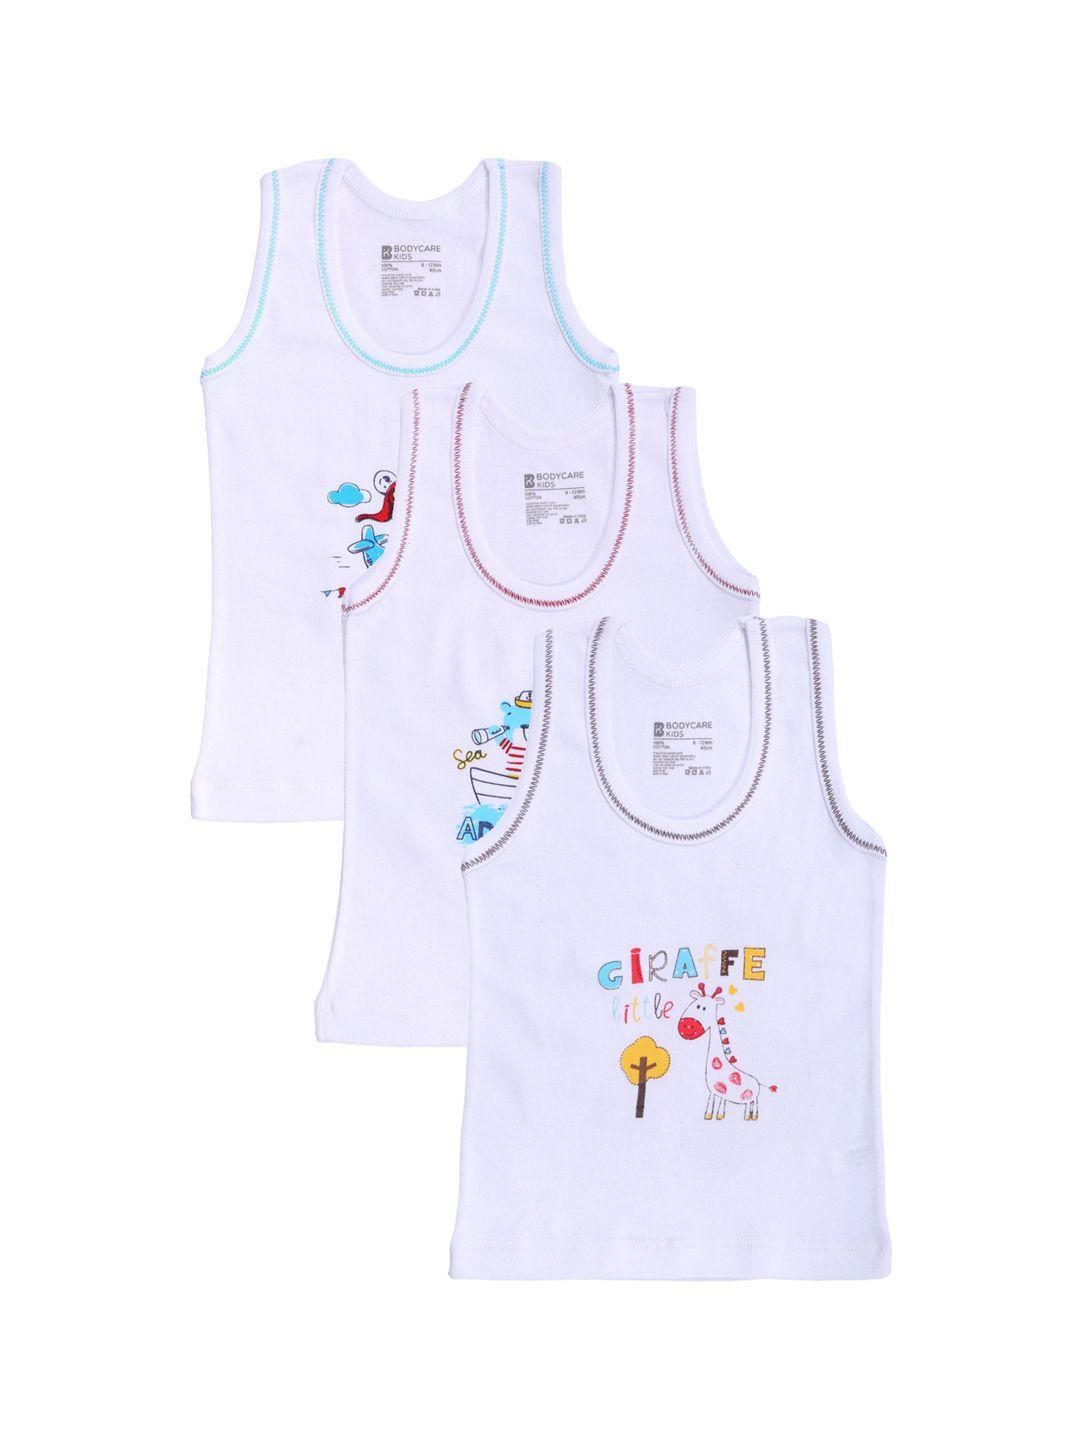 bodycare kids infant boys pack of 3 white printed cotton innerwear basic vests